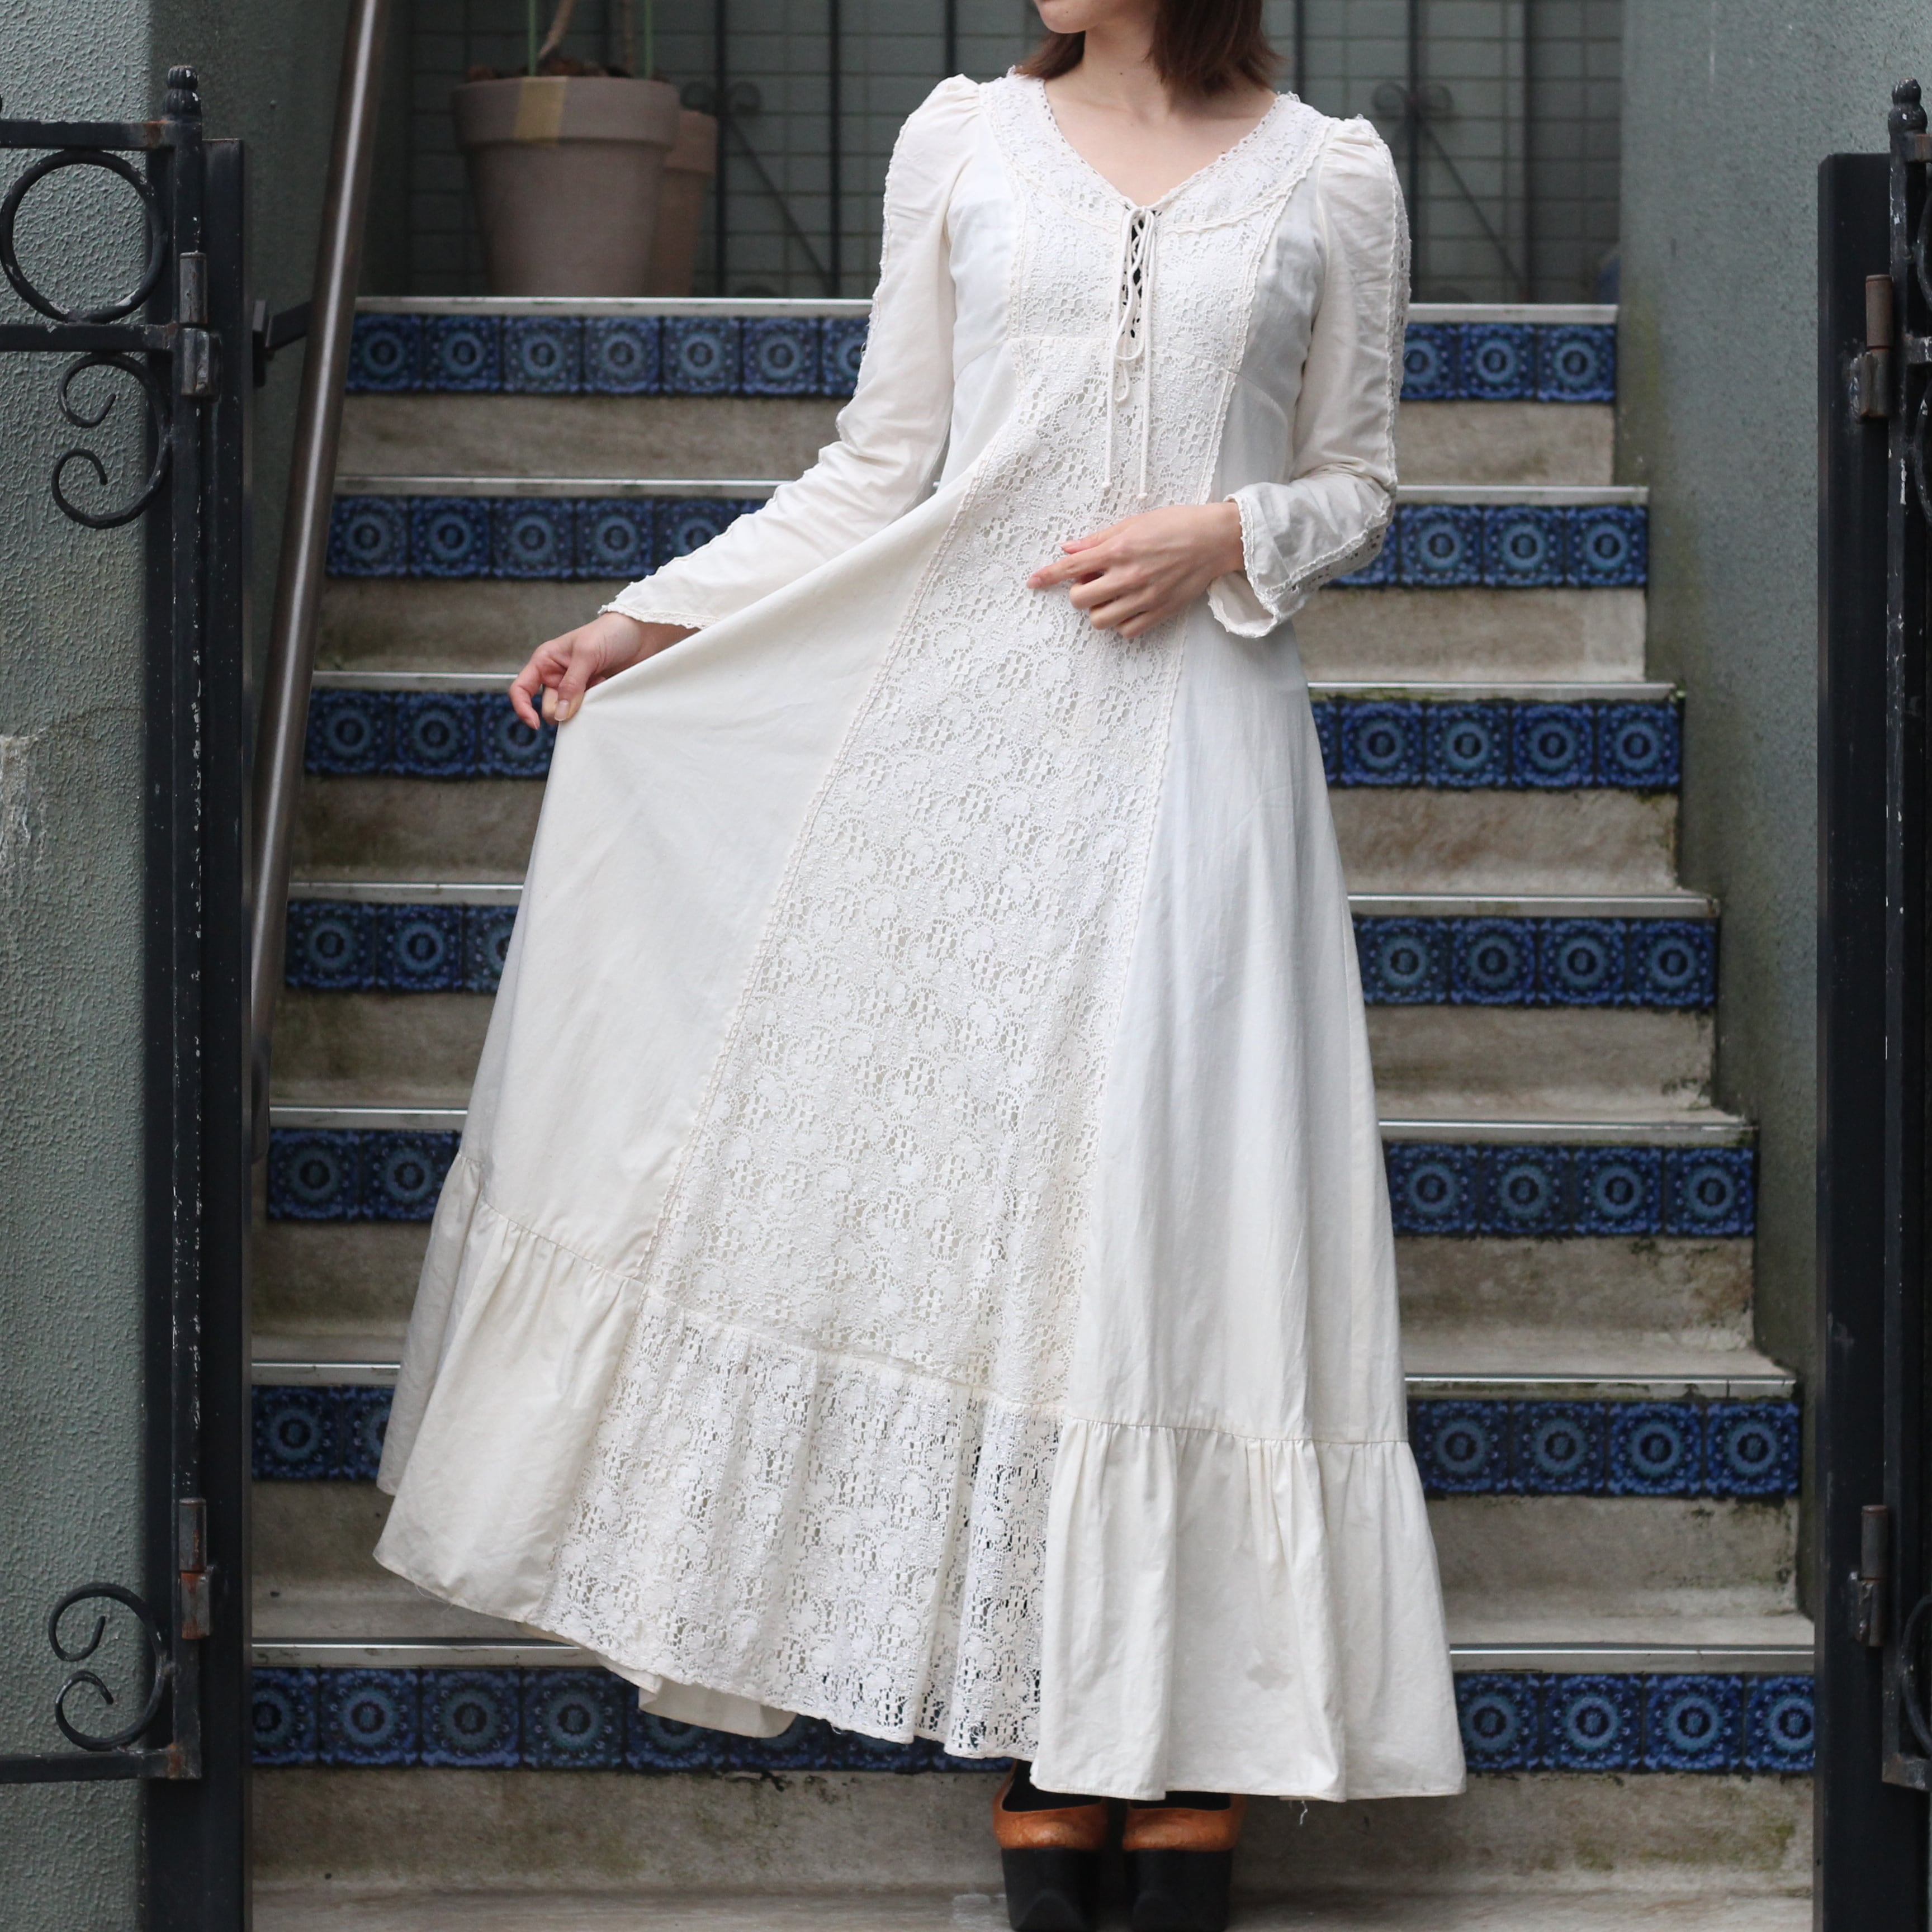 SPECIAL ITEM* 60's～70's GUNNE SAX LACE DESIGN LONG DRESS ONE